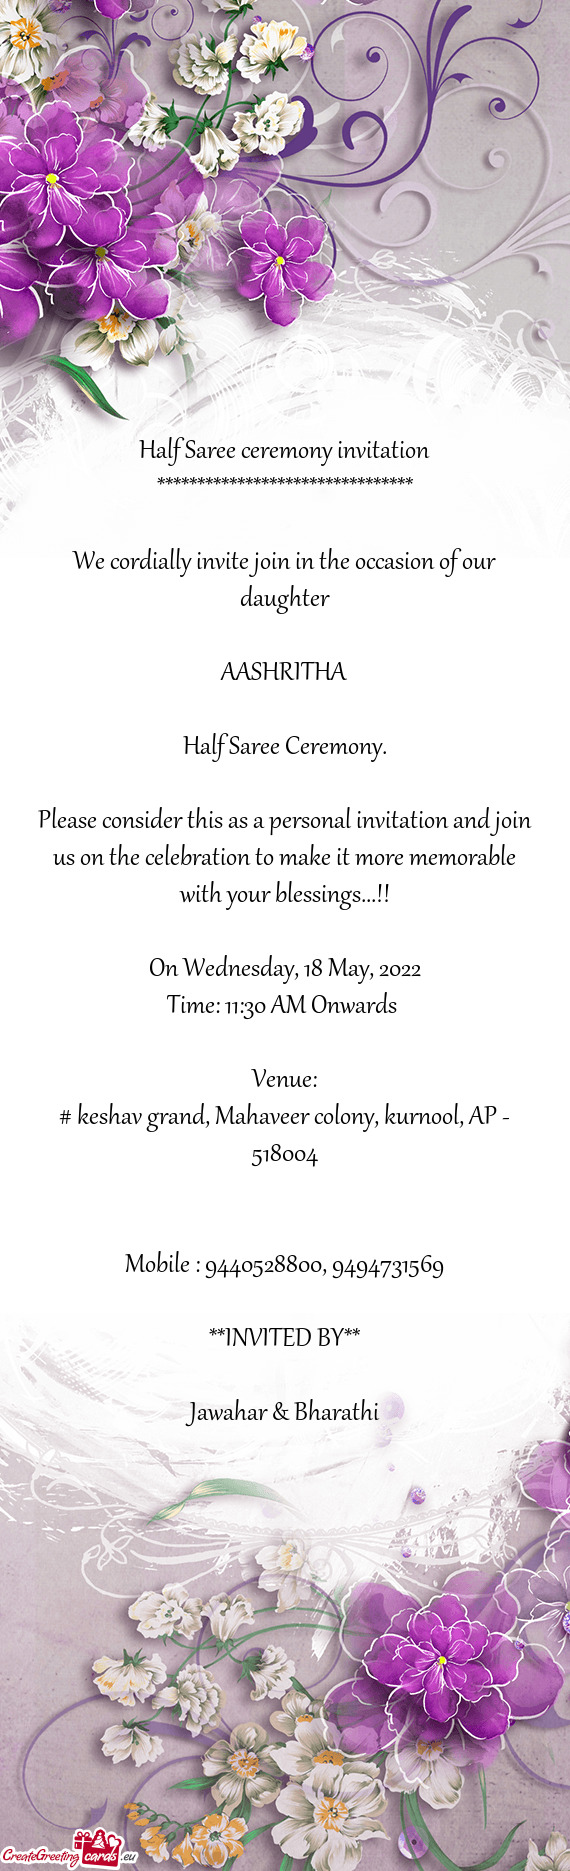 We cordially invite join in the occasion of our daughter